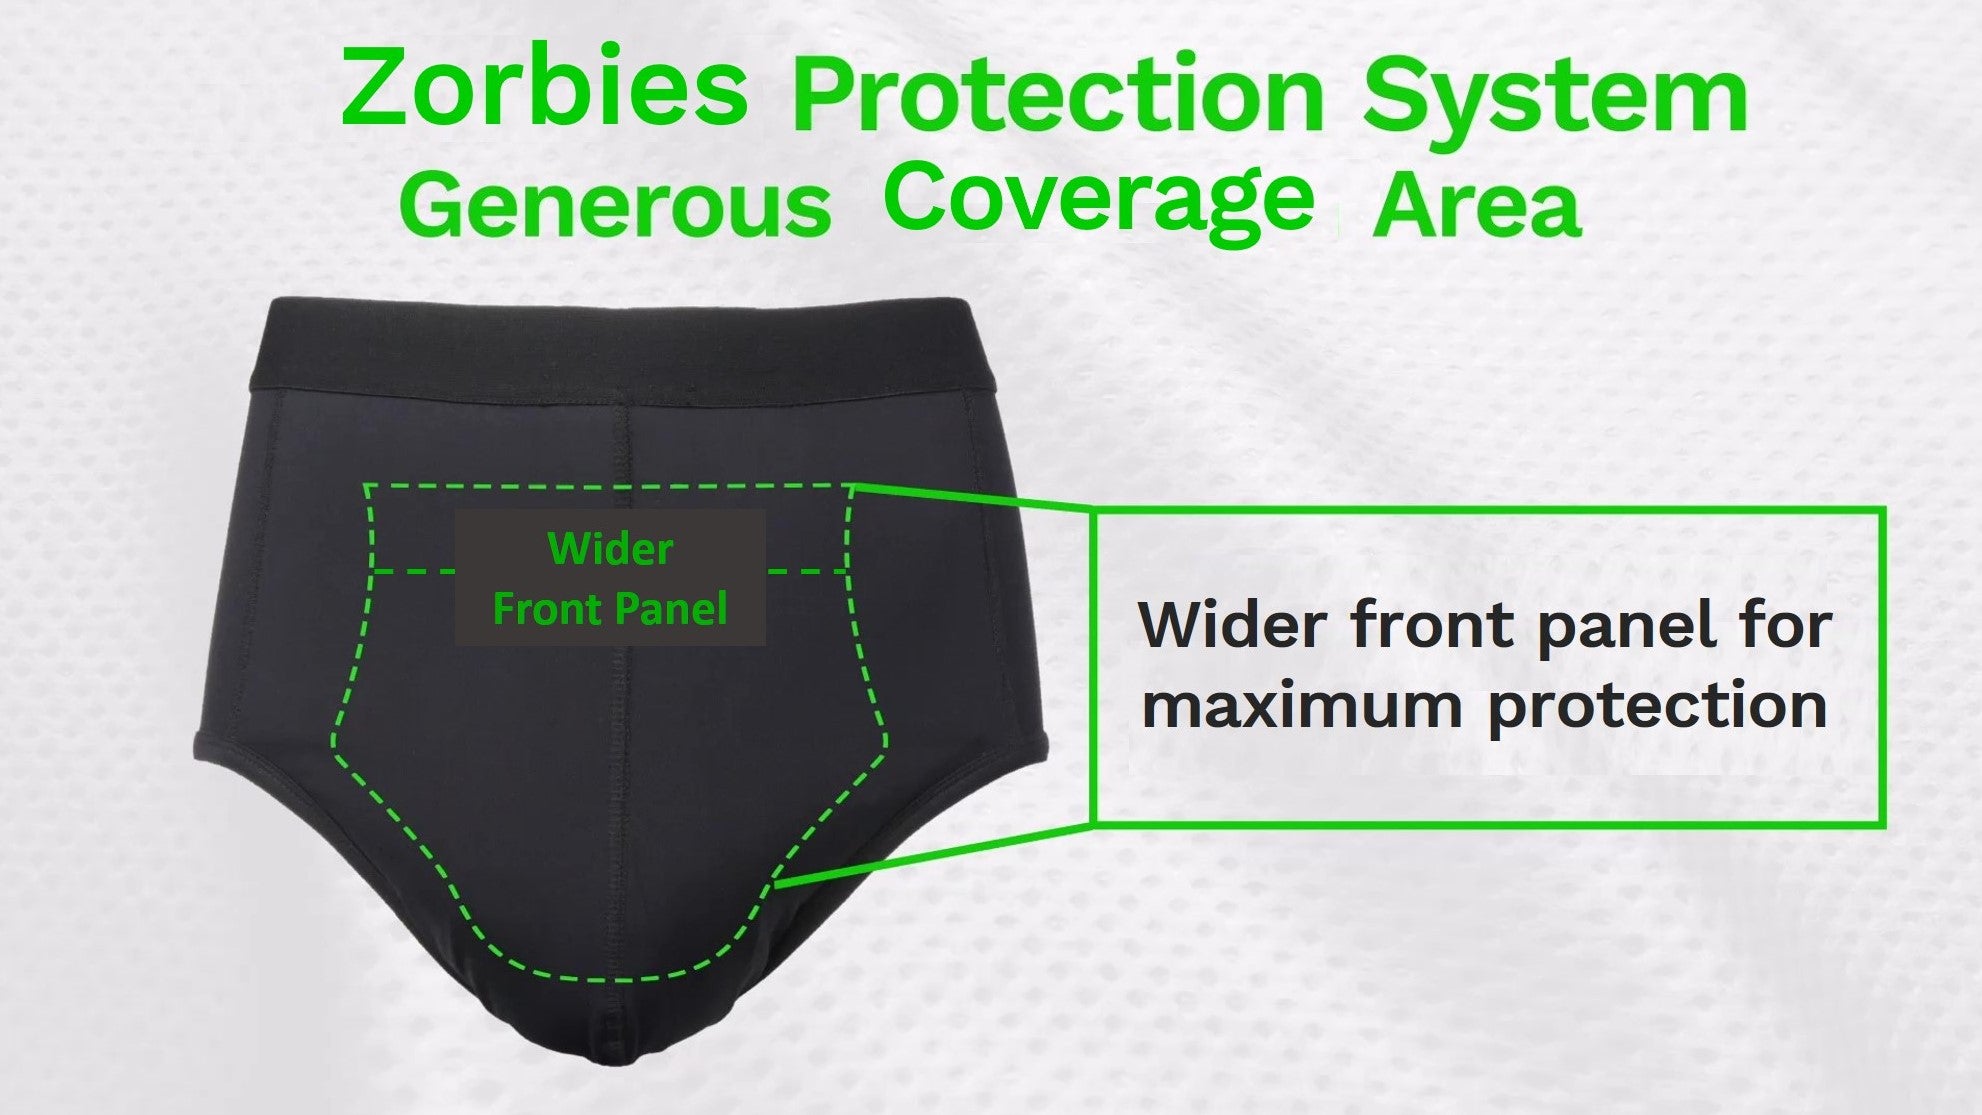 Incontinence Underwear for Men 2 Pack Washable Urinary Briefs with